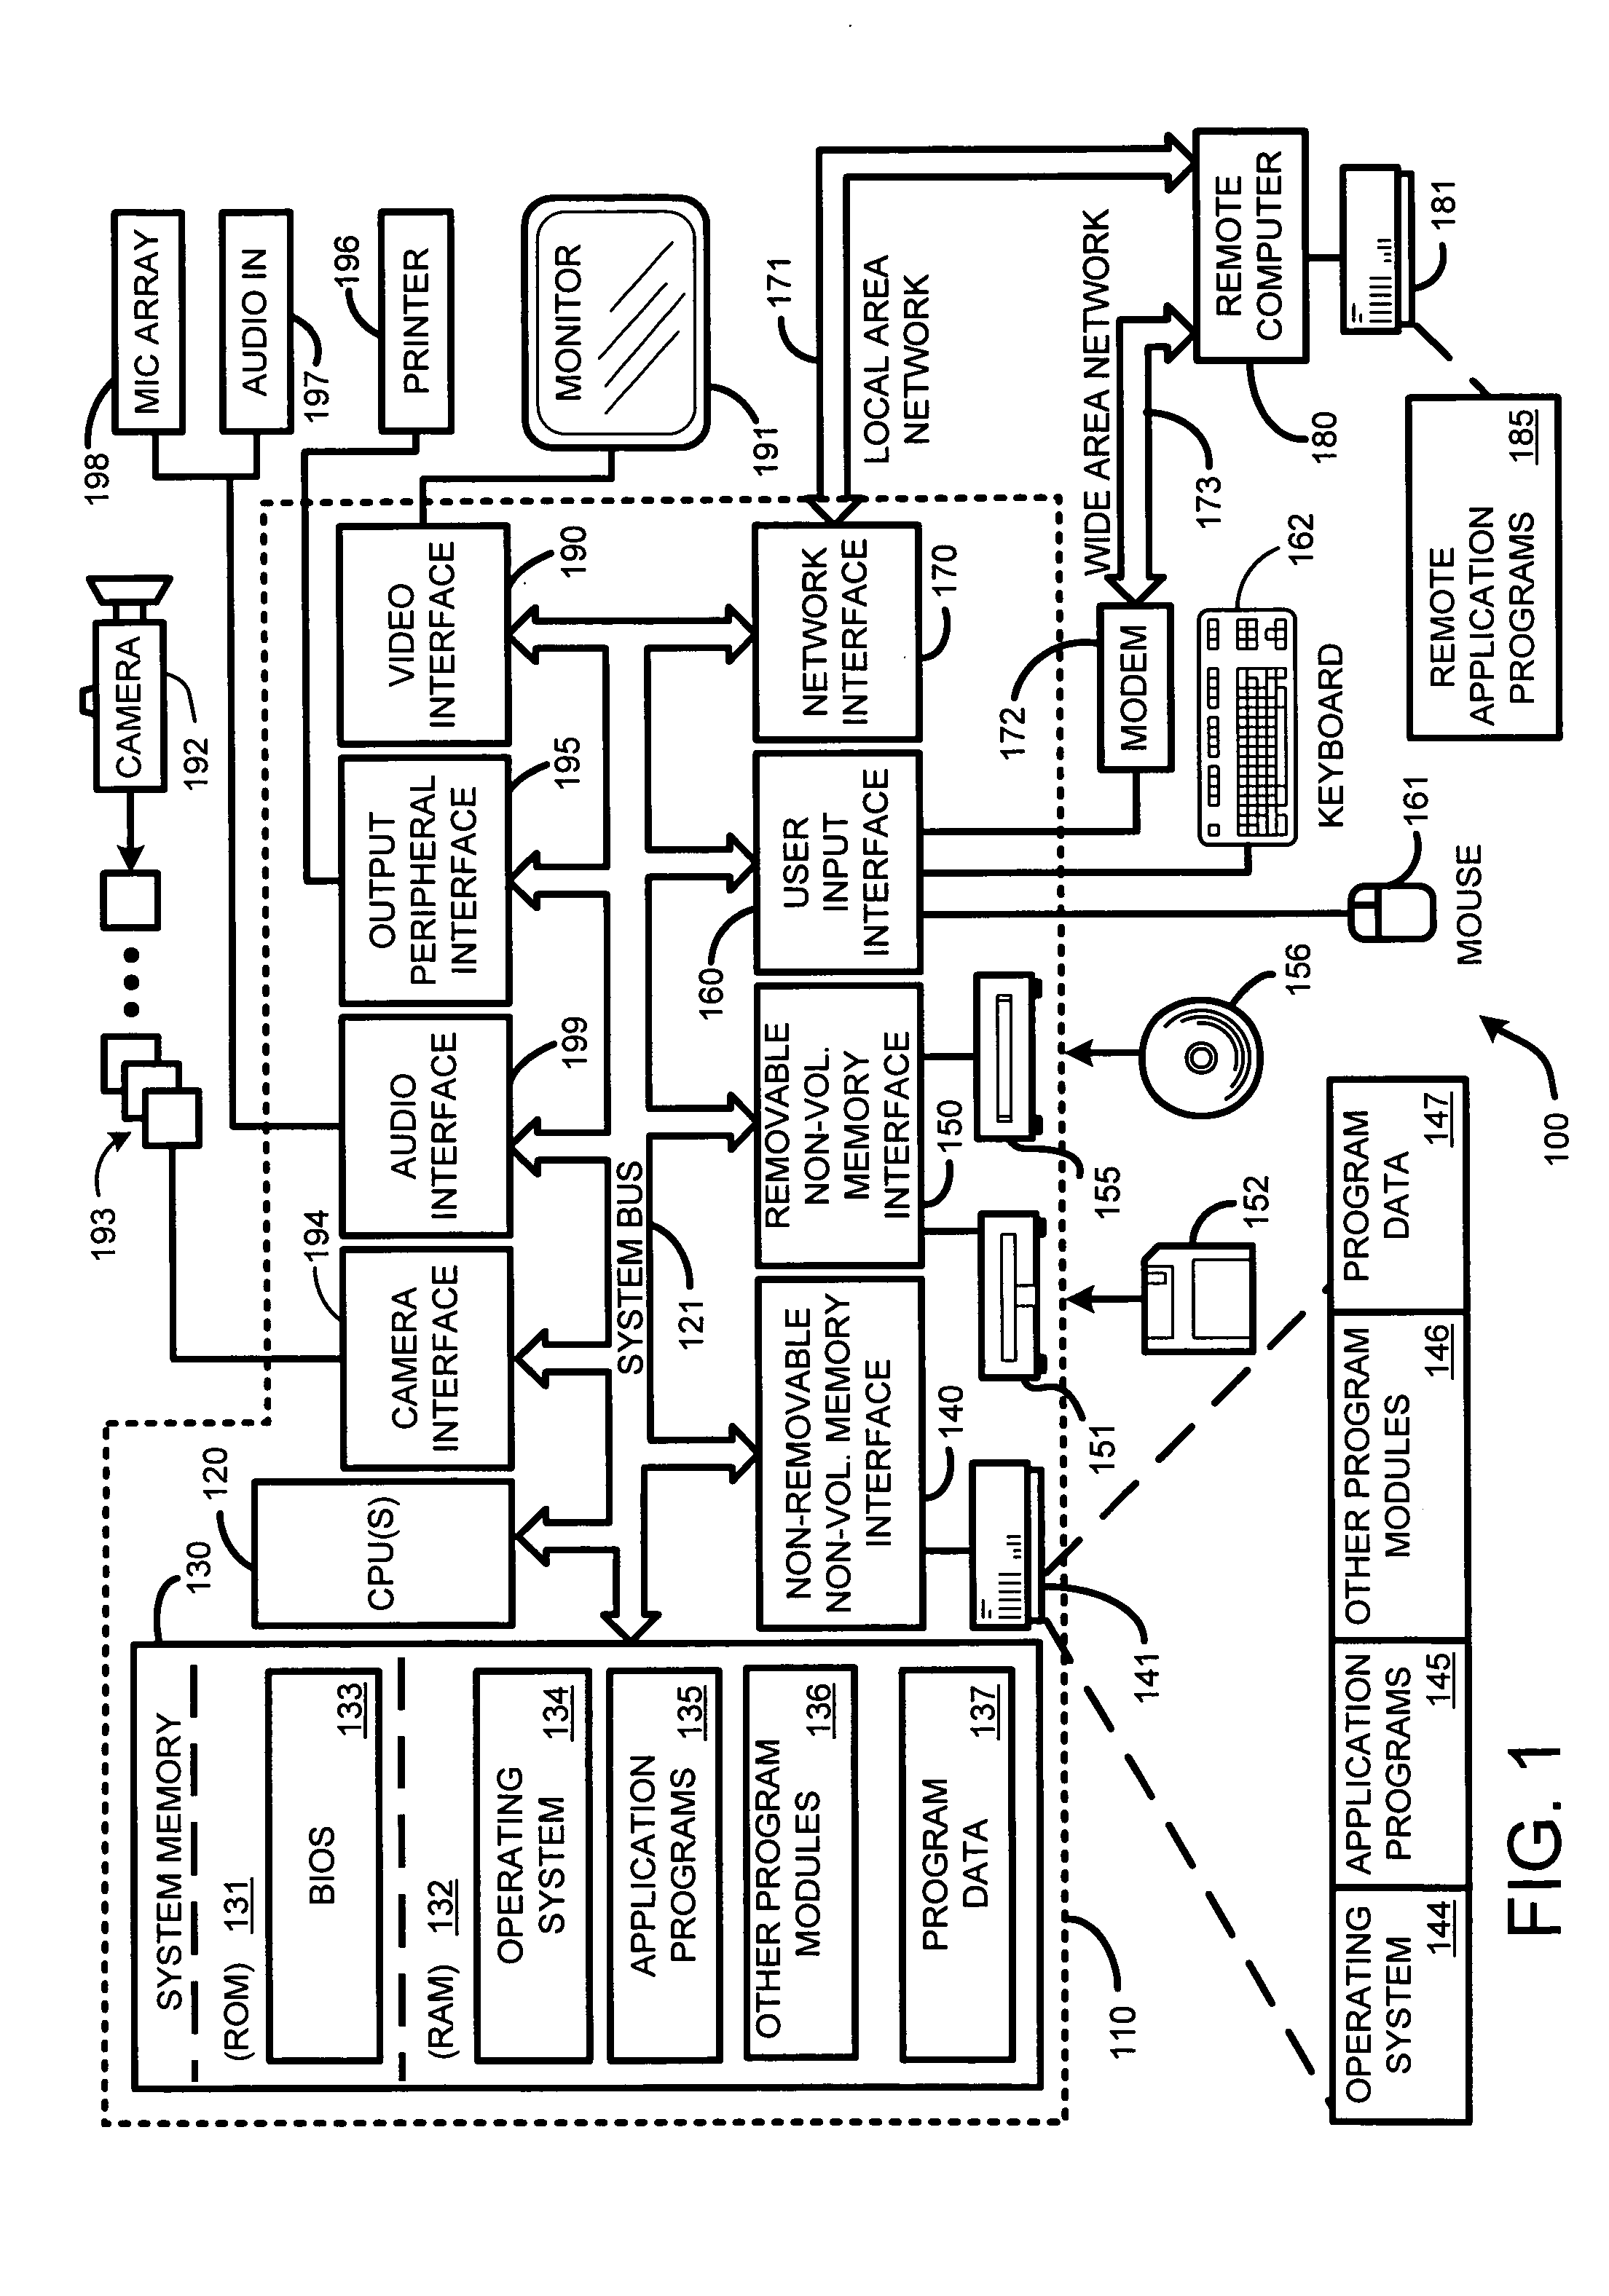 Client-based generation of music playlists from a server-provided subset of music similarity vectors